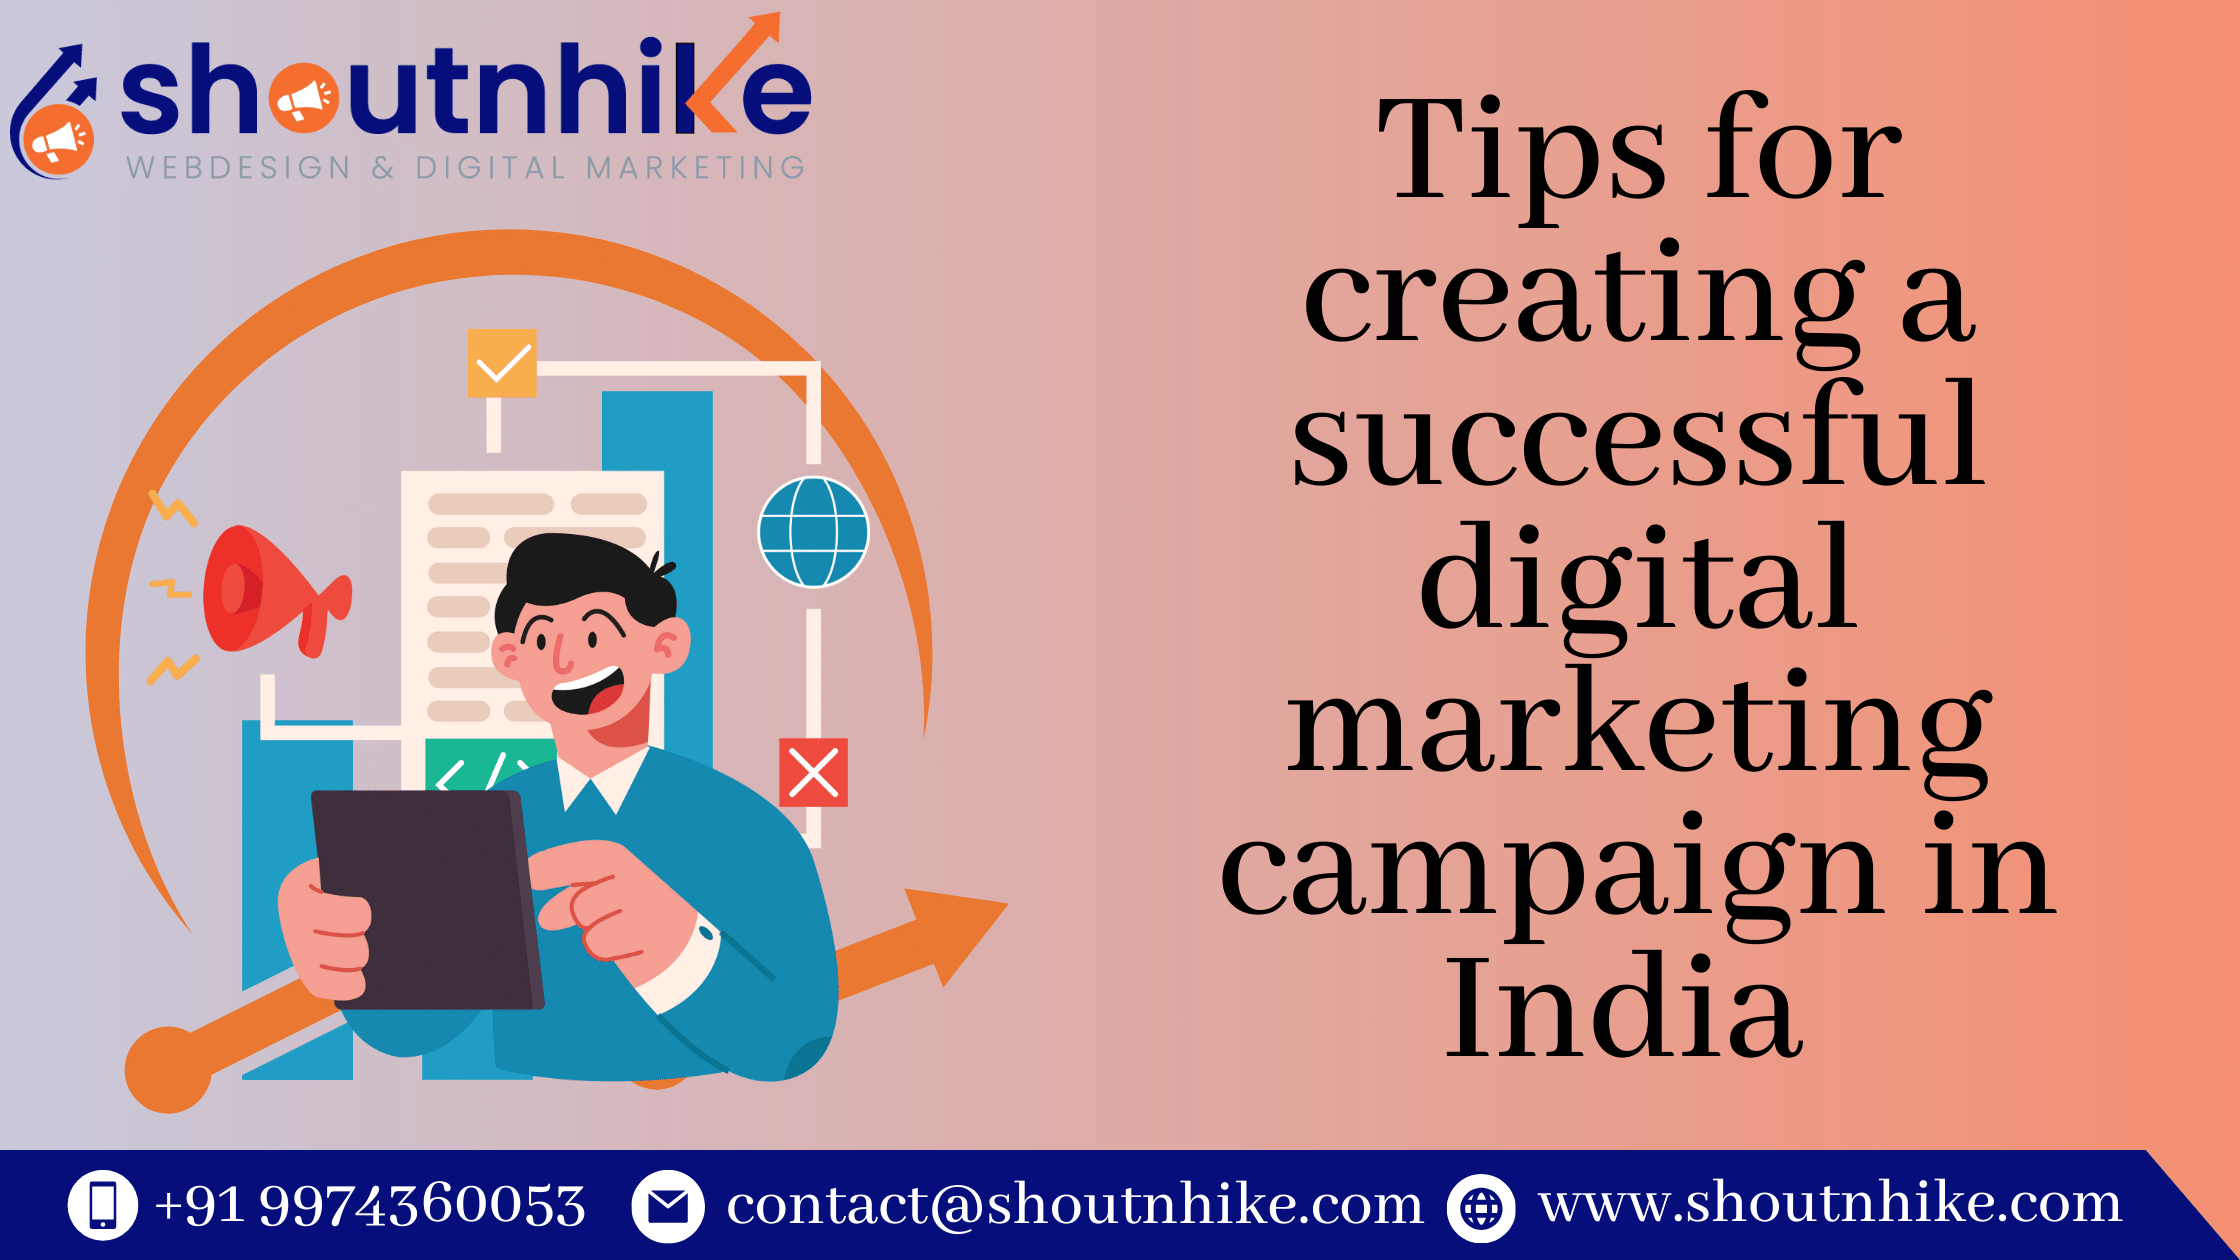 Tips for creating a successful digital marketing campaign in India